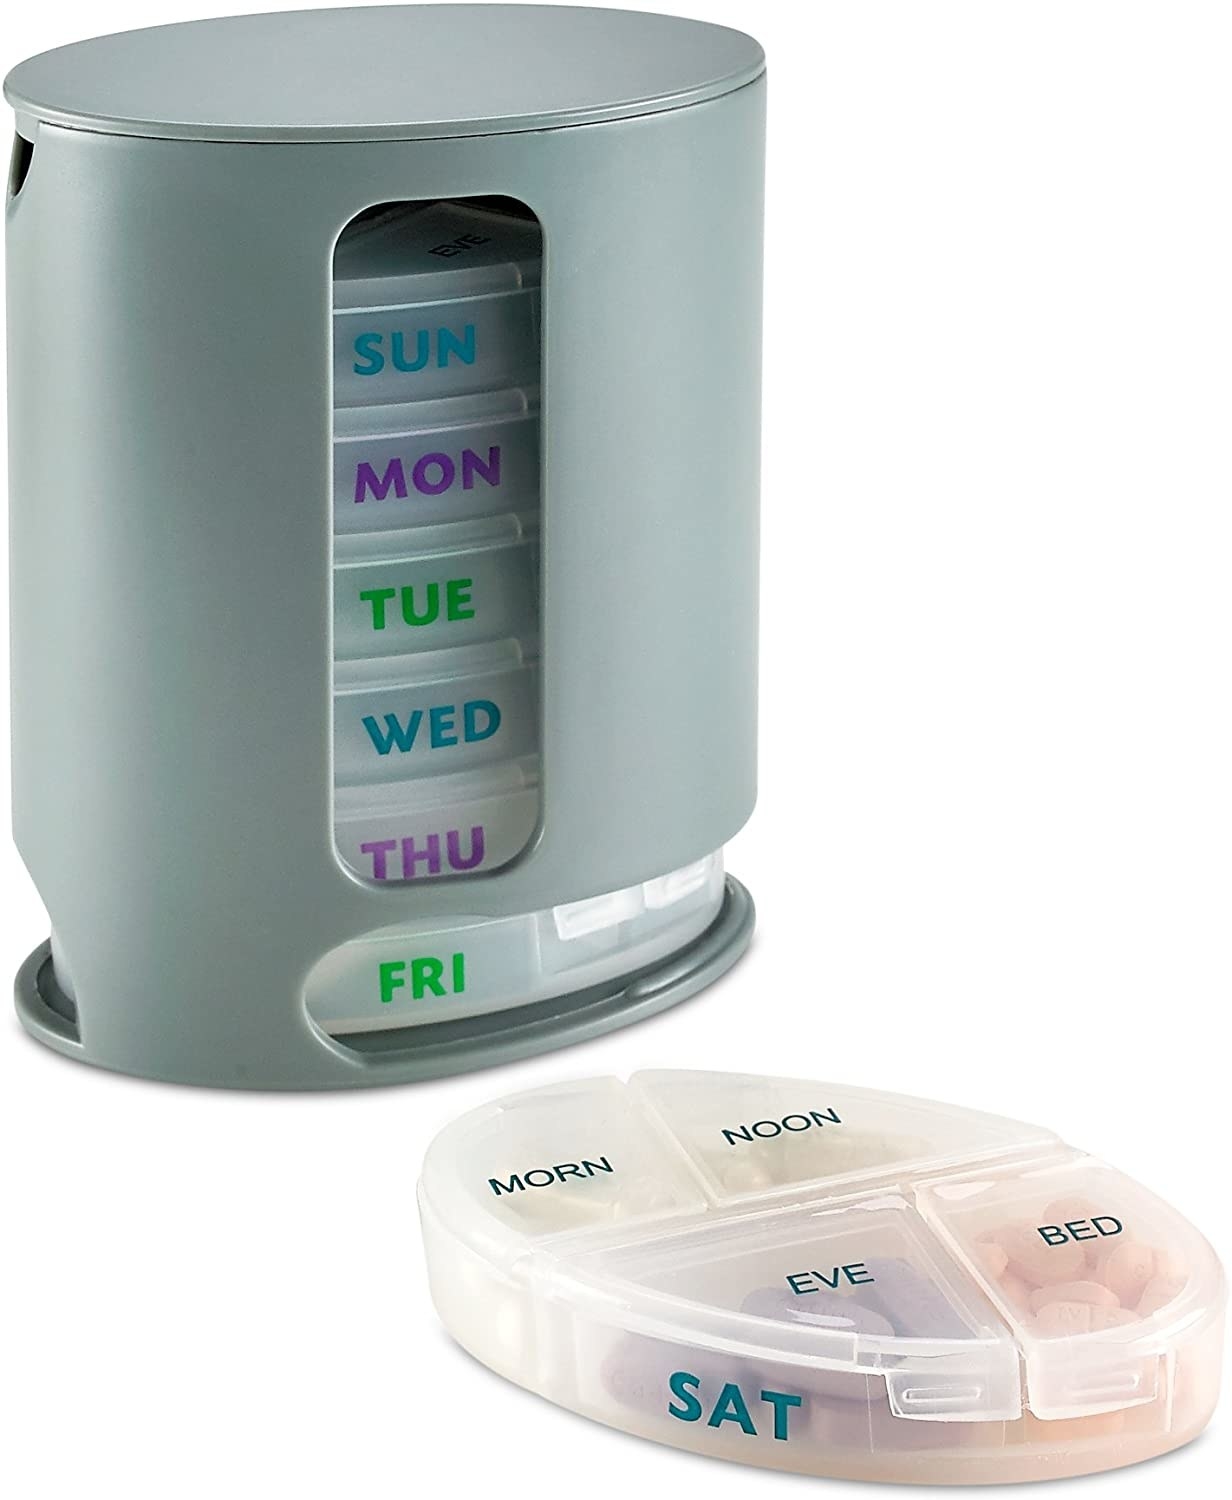 The dispenser and an insert with 4 compartments for morning, noon, evening, and bedtime